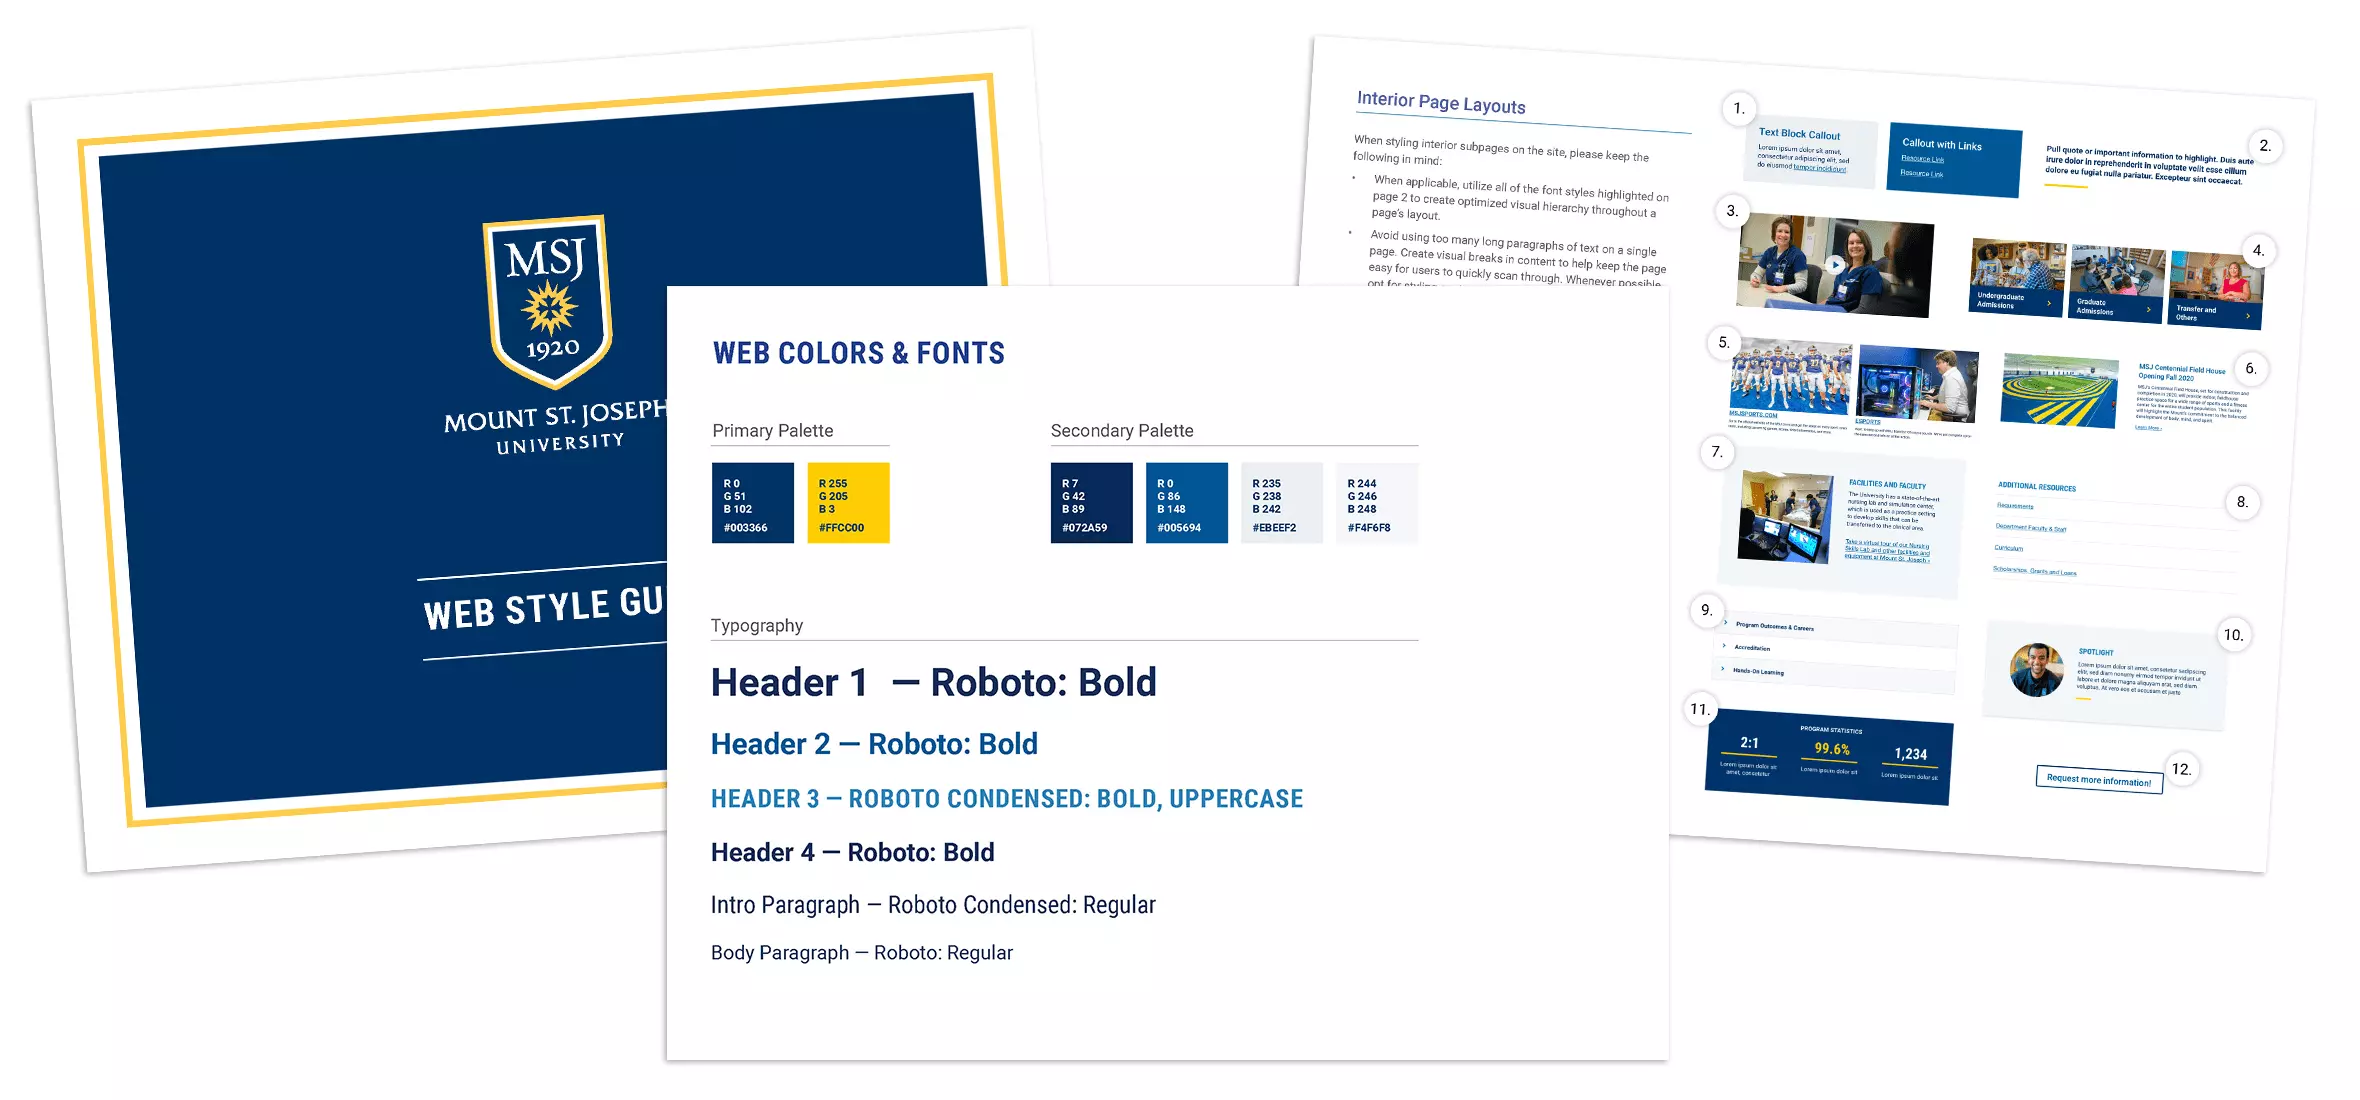 Pages from the web style guide we created for the MSJ website updates, showing new color palettes, typography and page components